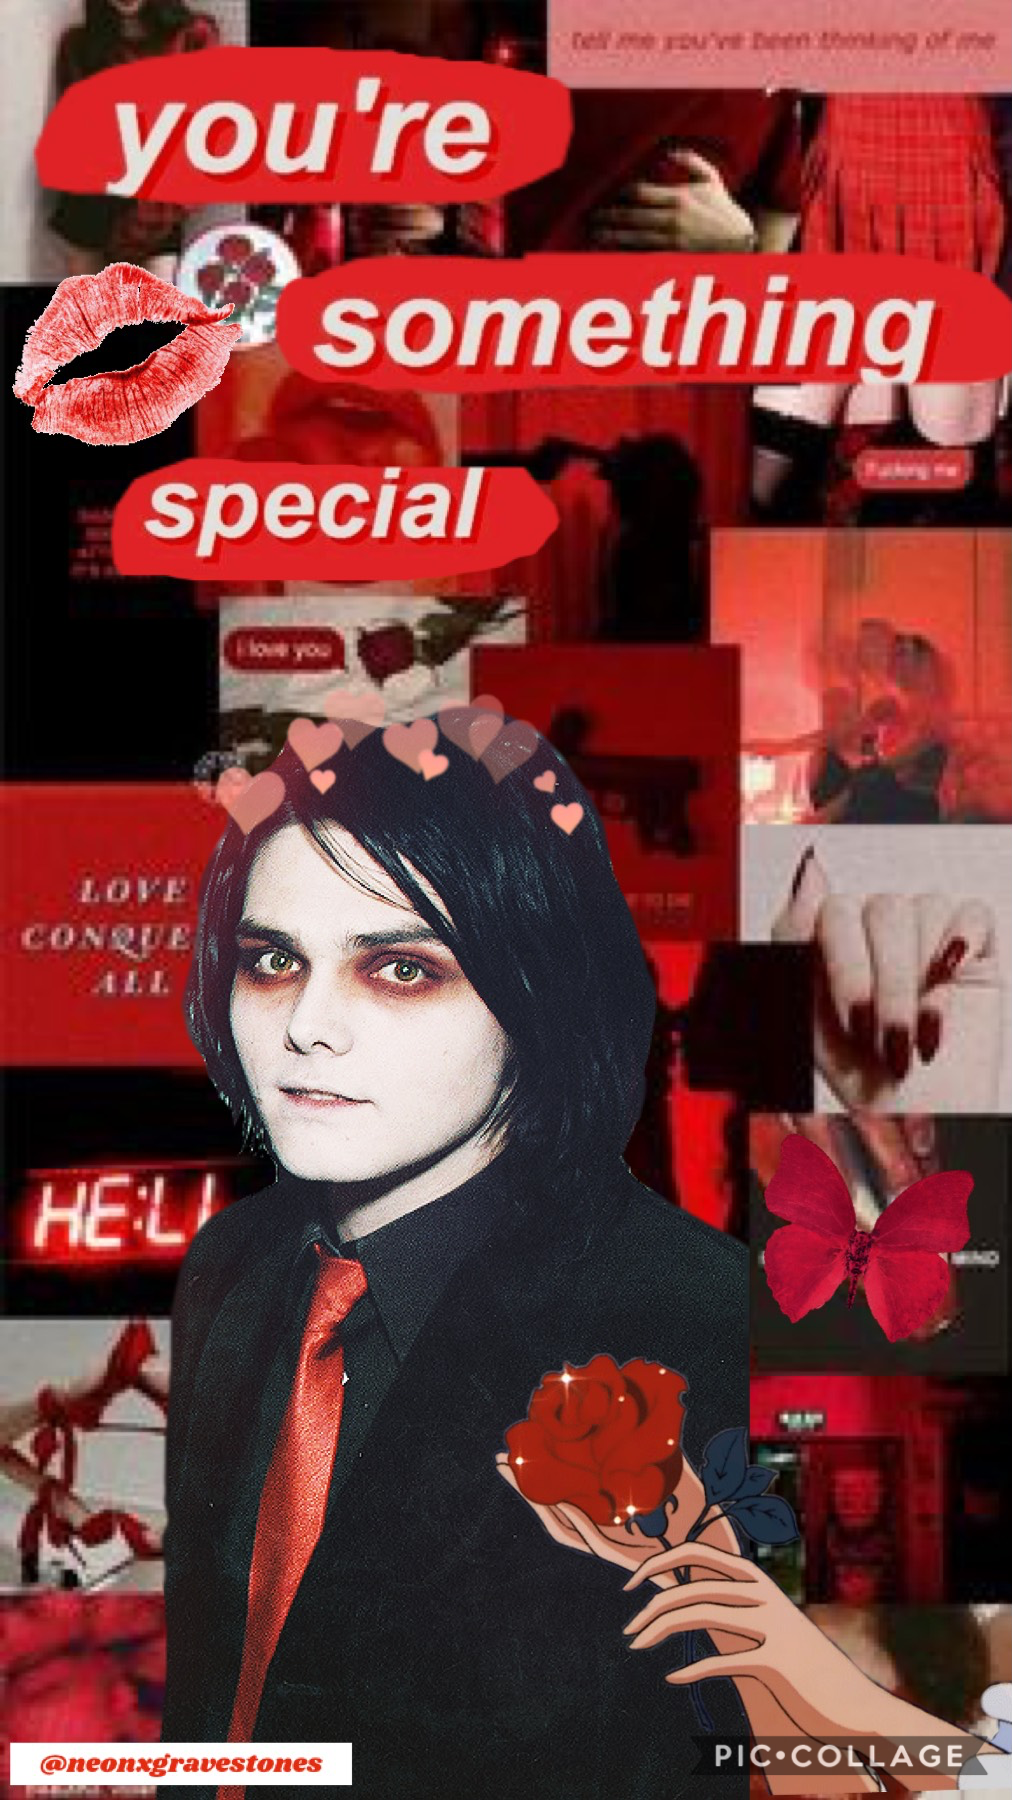 Here is a Gerard Way red aesthetic collage🍒